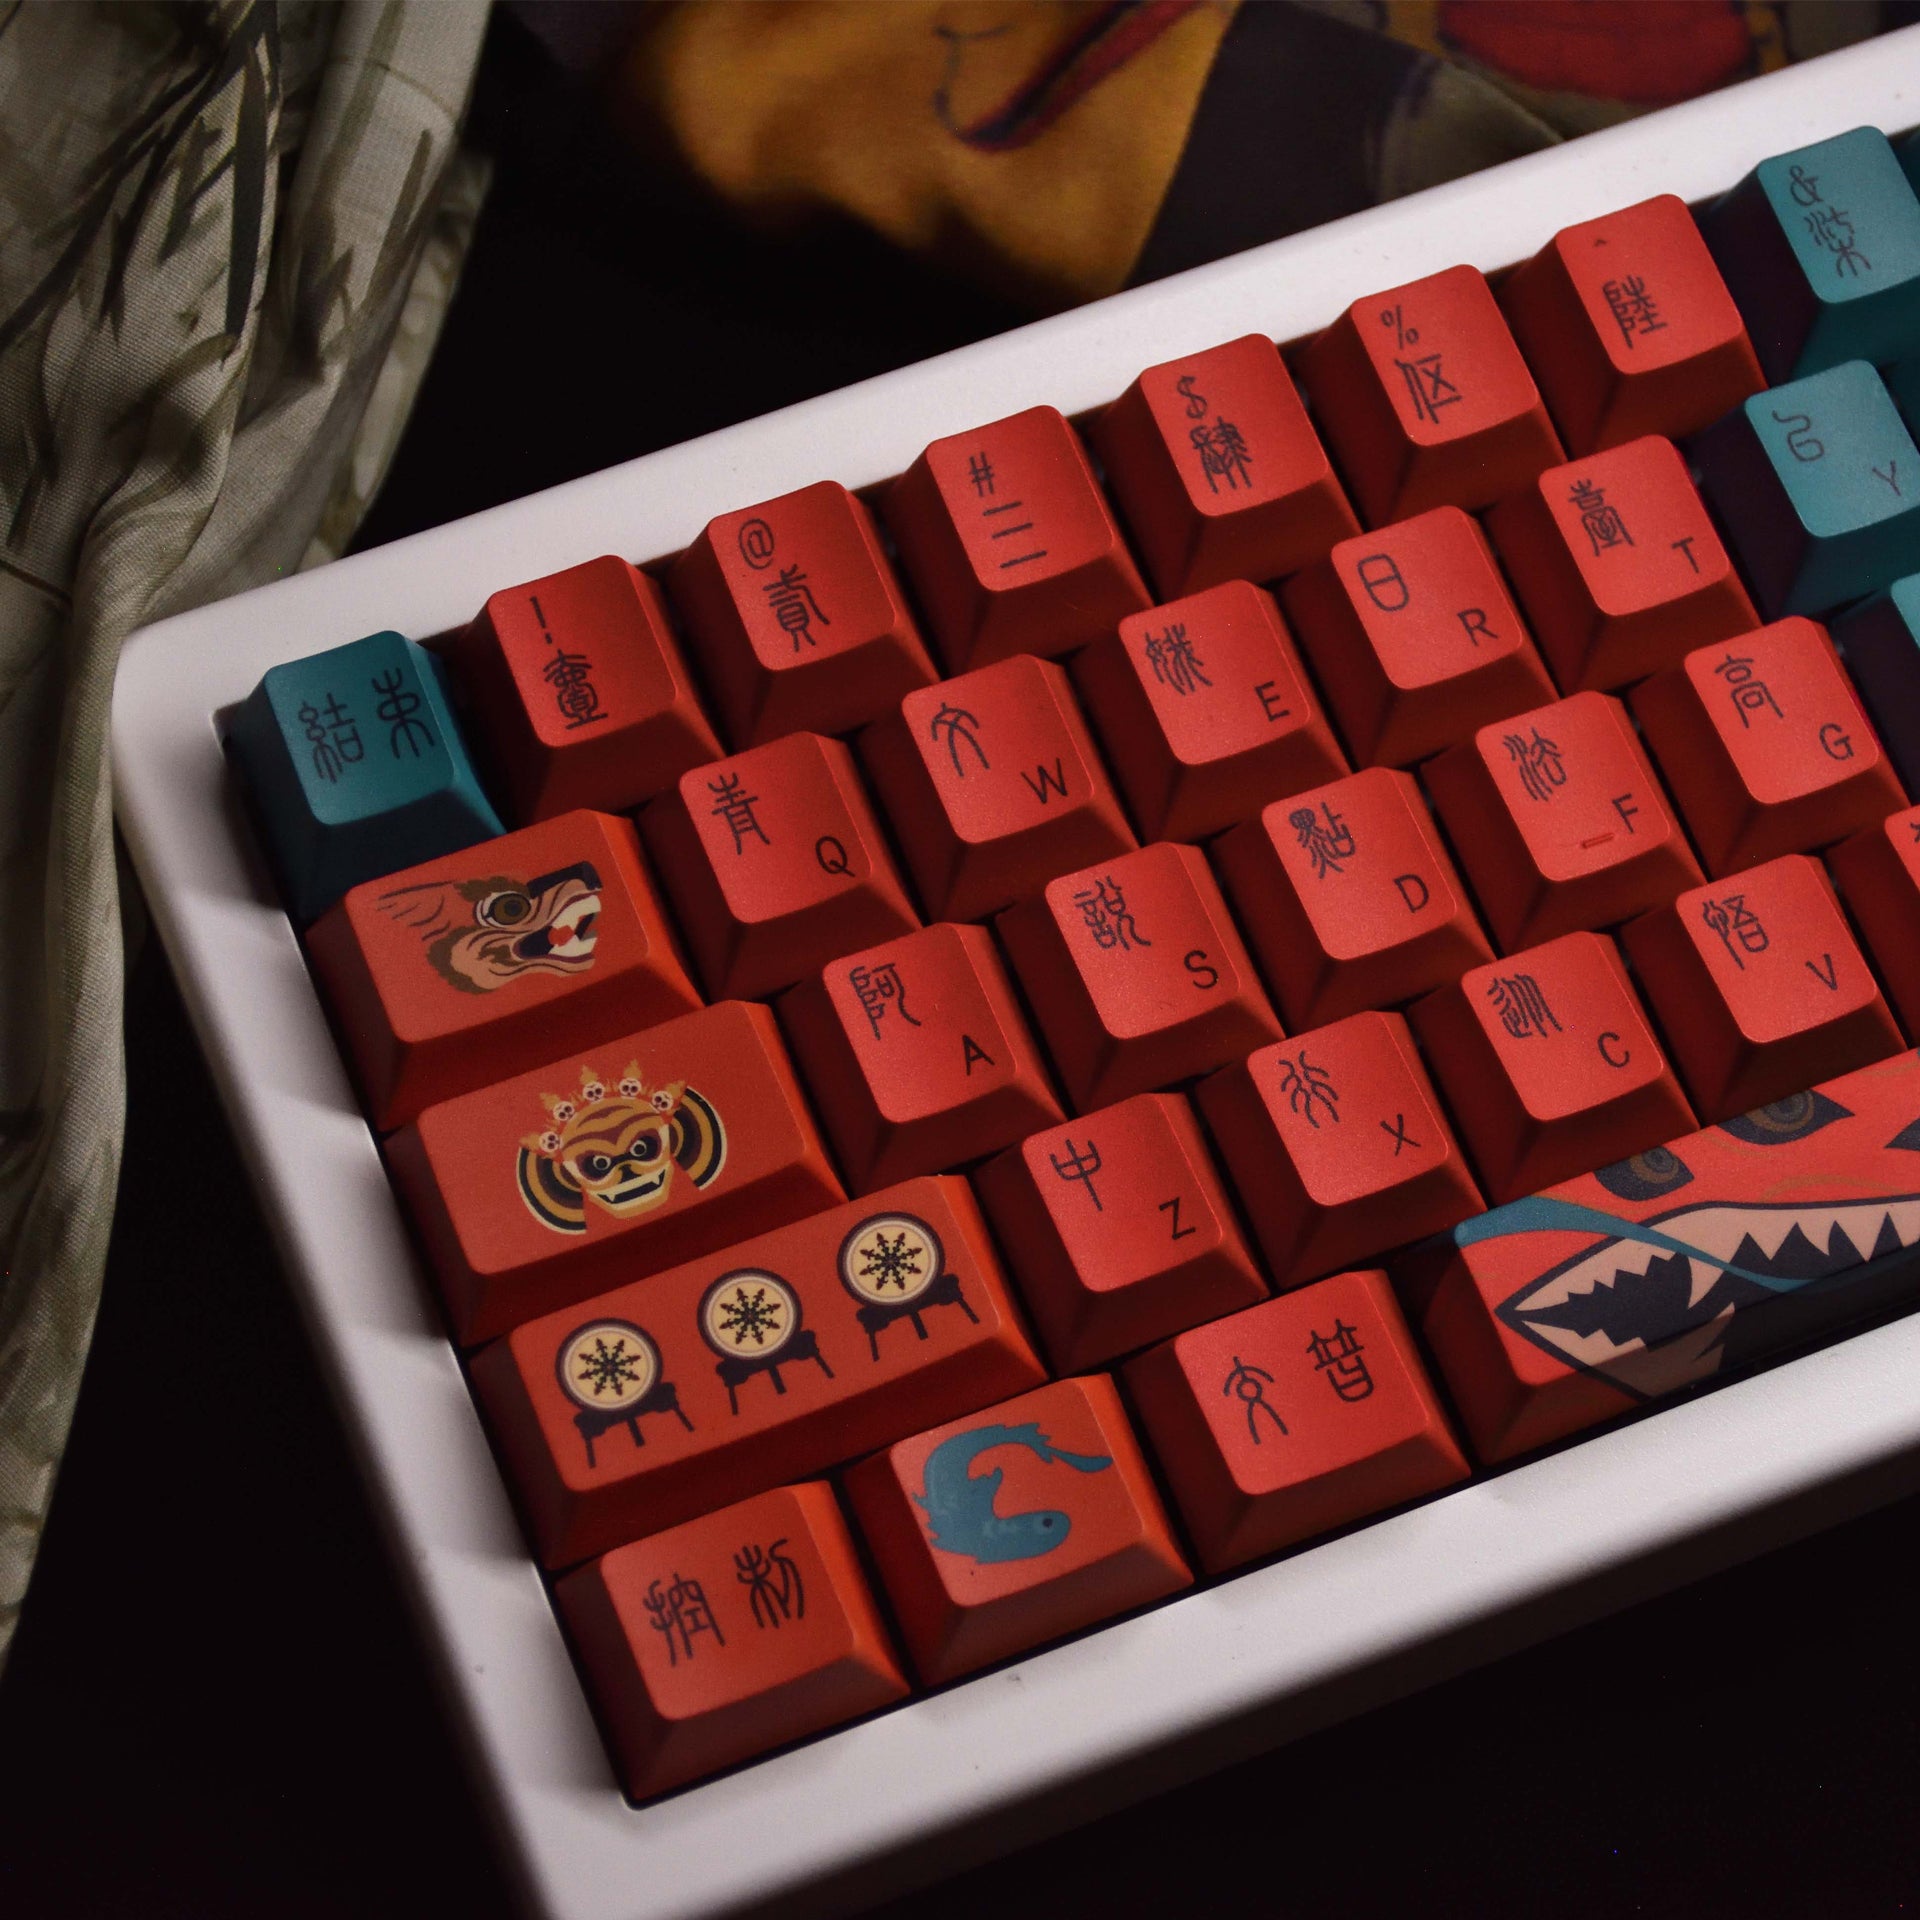 "Experience history with our 'Sacrifice Ancient Chinese Character' PBT Custom Keycaps from AIHey Studio. These unique keycaps feature a captivating ancient Chinese character, blending blue and orange for a visually striking design. Crafted for split keyboards, they evoke China's mystique. Quality exceeds GMK, perfect for enthusiasts." 📜🖋️💻 #KeyboardAccessories #CustomKeycaps #ChineseHeritage